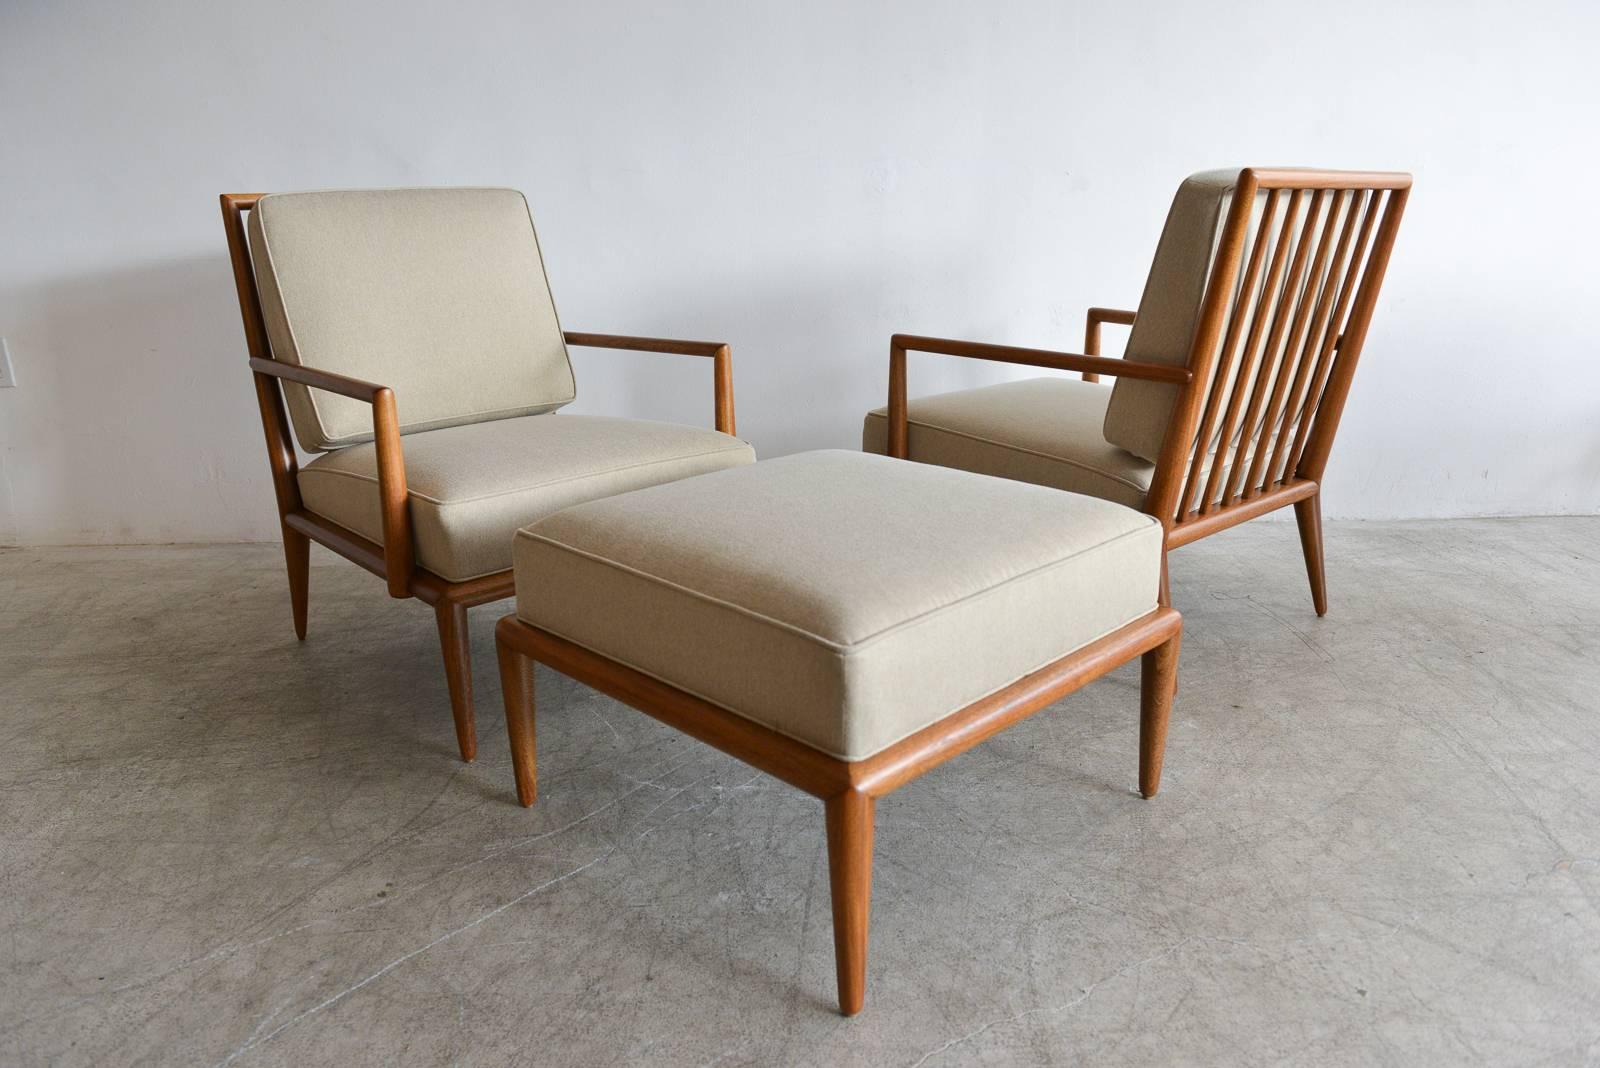 Exceptional pair of T.H. Robsjohn-Gibbings for Widdicomb mahogany spindle back lounge chairs. Professionally restored to showroom condition with new beige cushions and foam. Classic and iconic lines, very comfortable. Matching ottoman also available